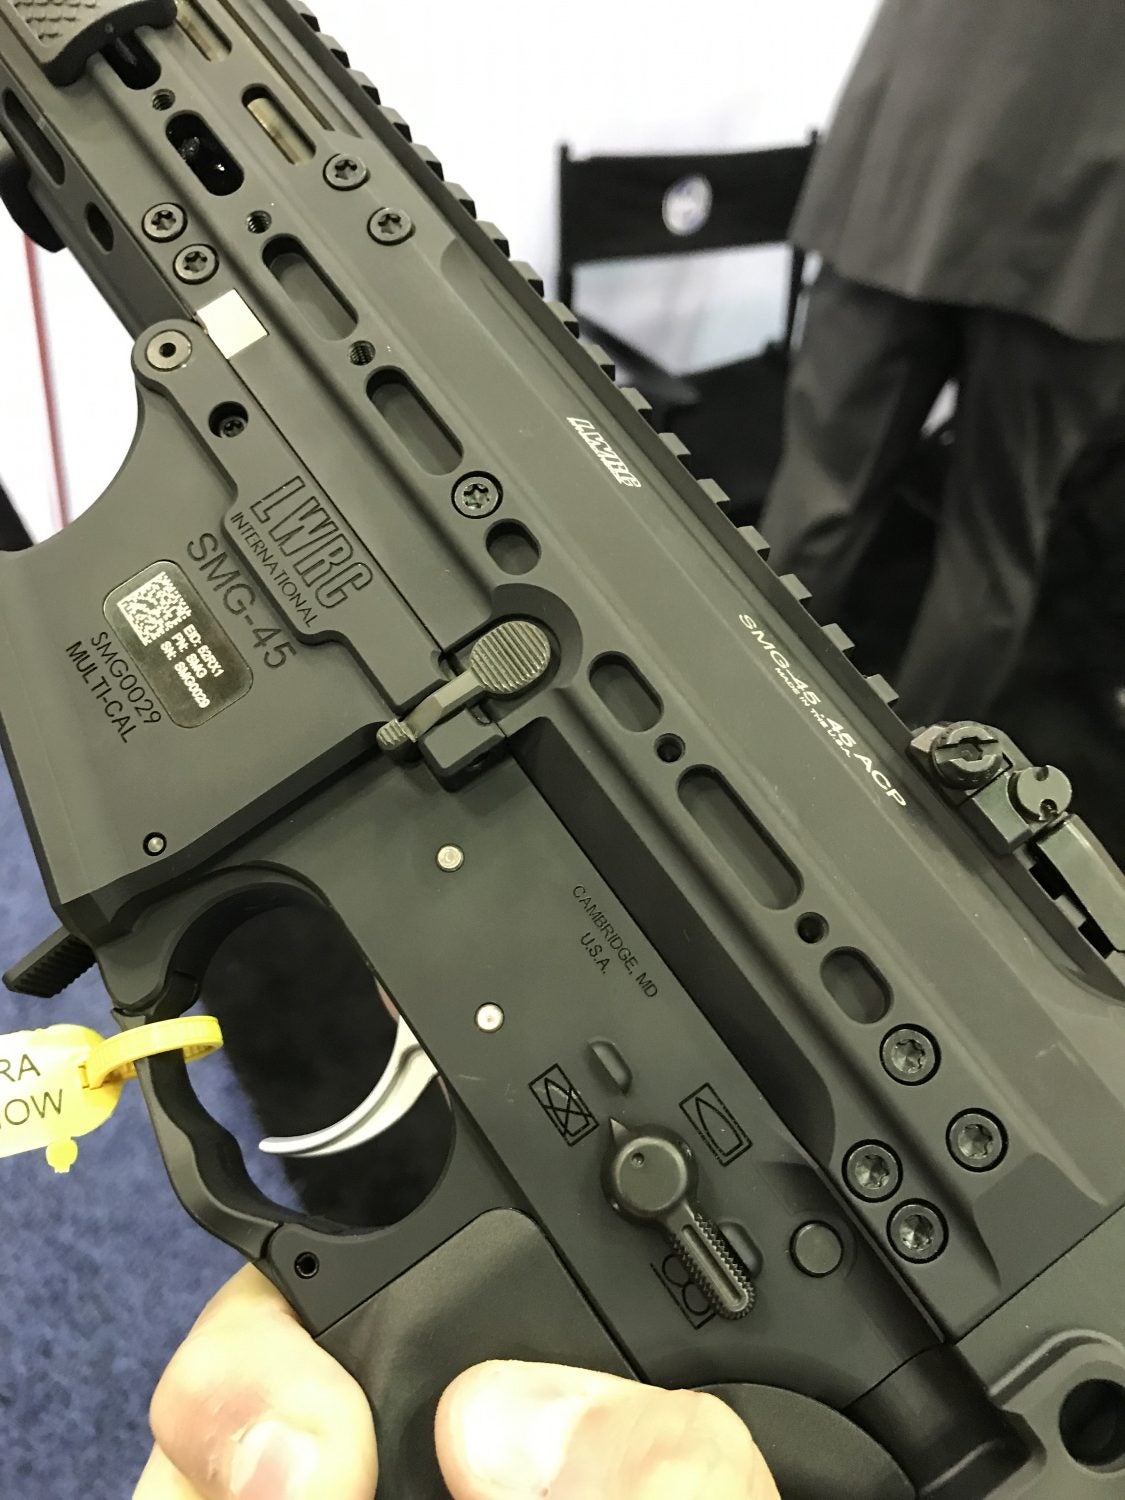 Overall, I think the LWRC SMG-45 is a fresh new entry in th PCC world